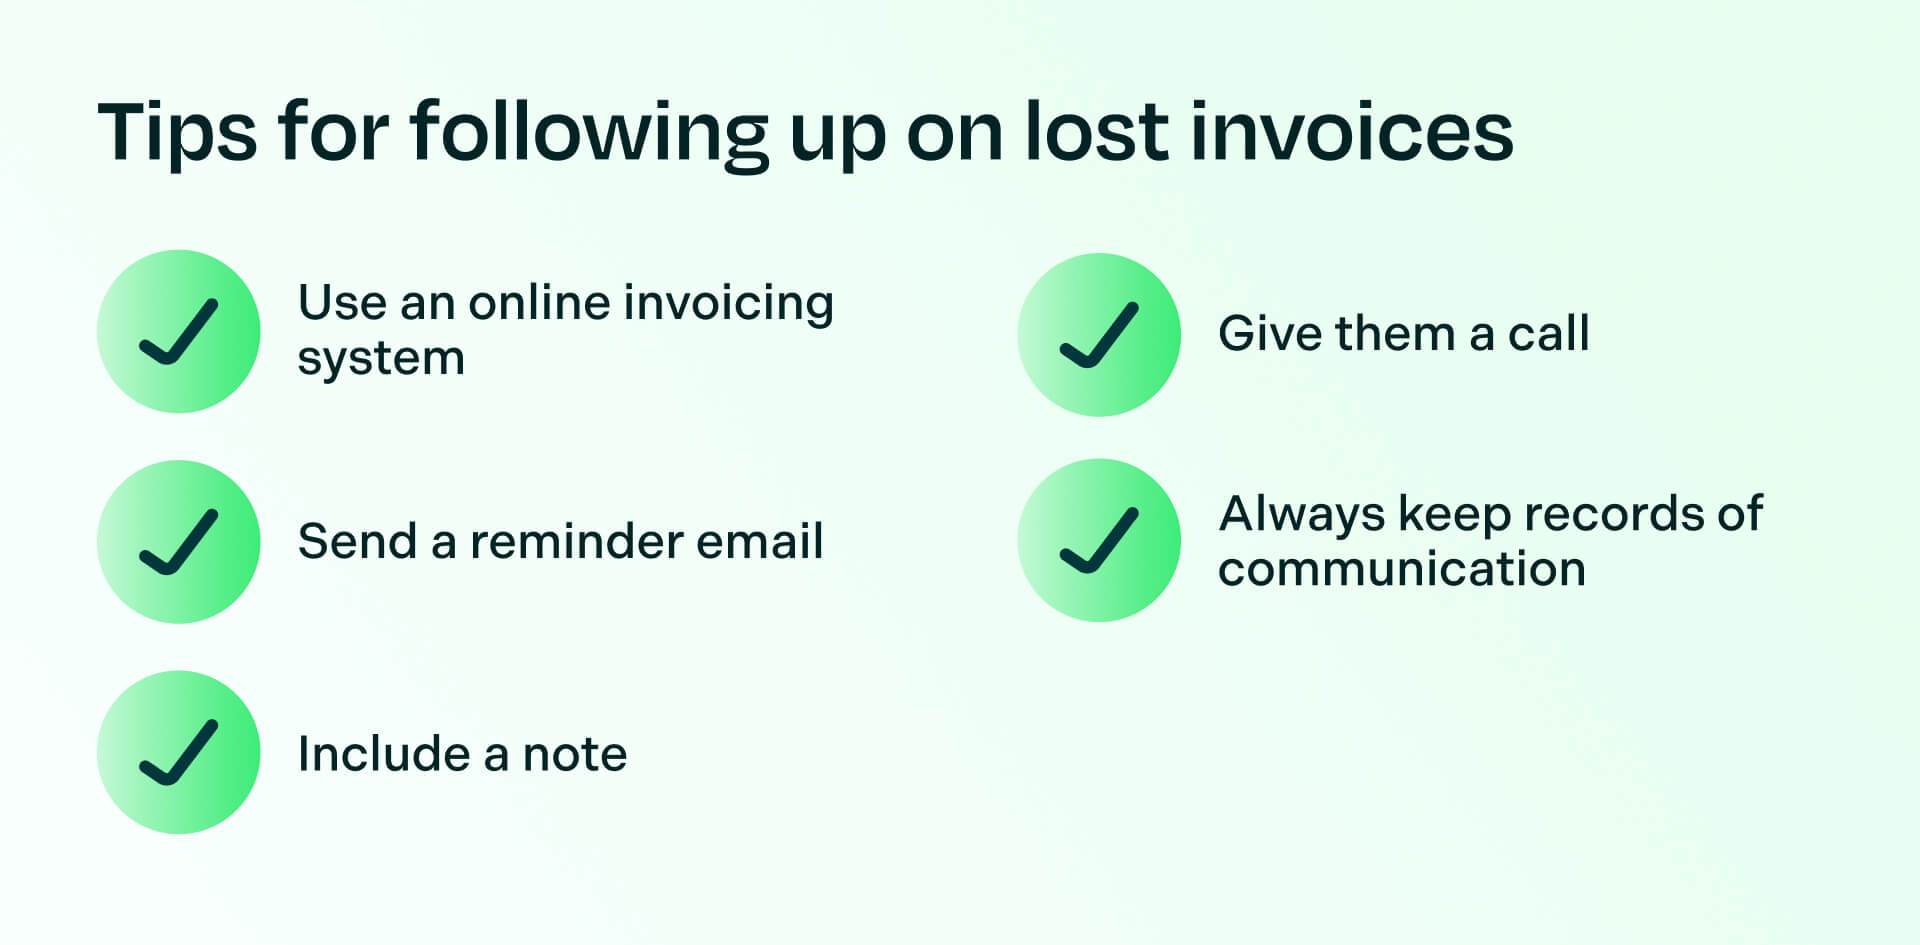 Tips for following up on lost invoices chart